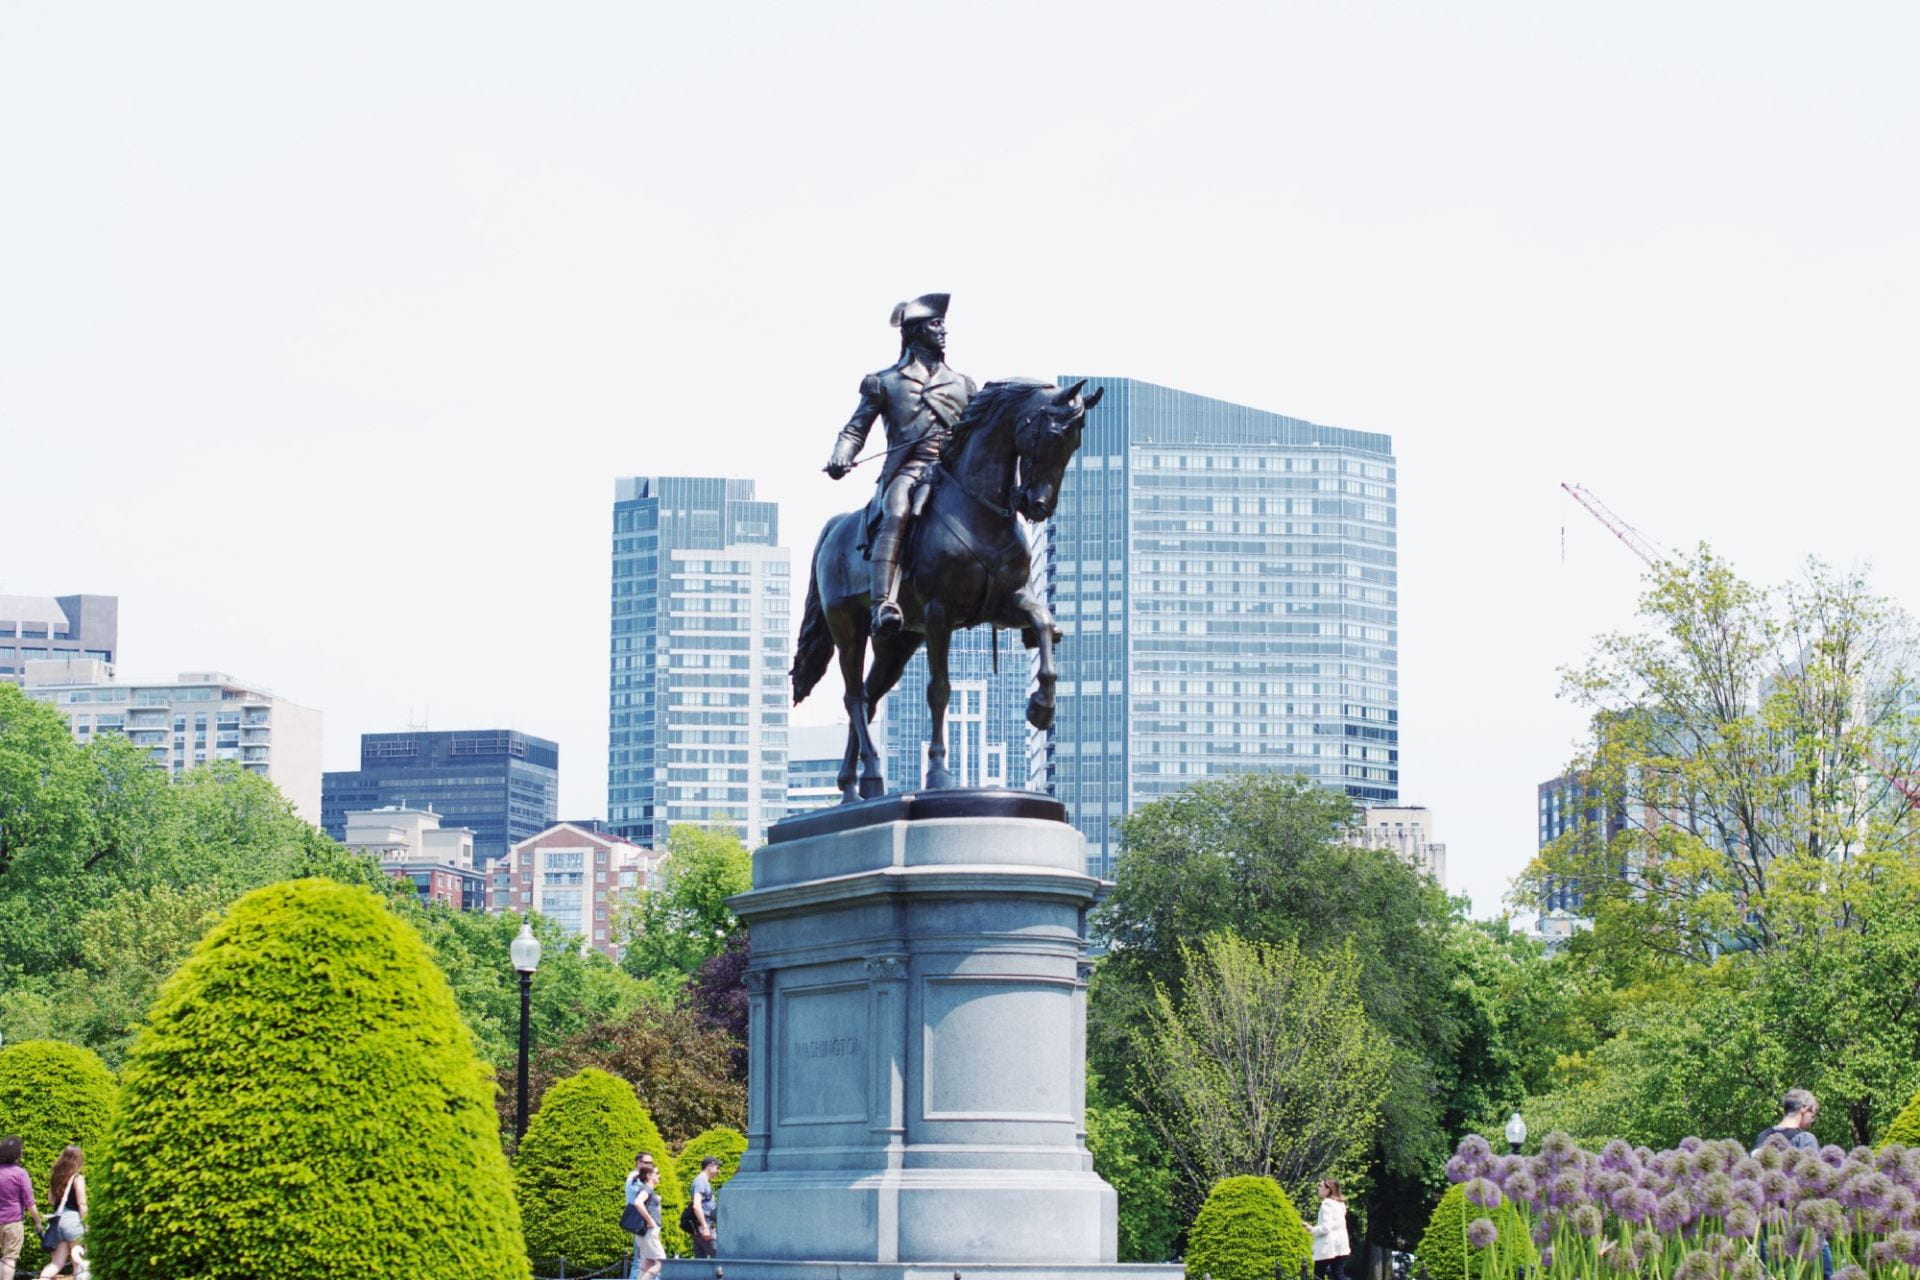 Statue of Paul Revere on a horse in Boston